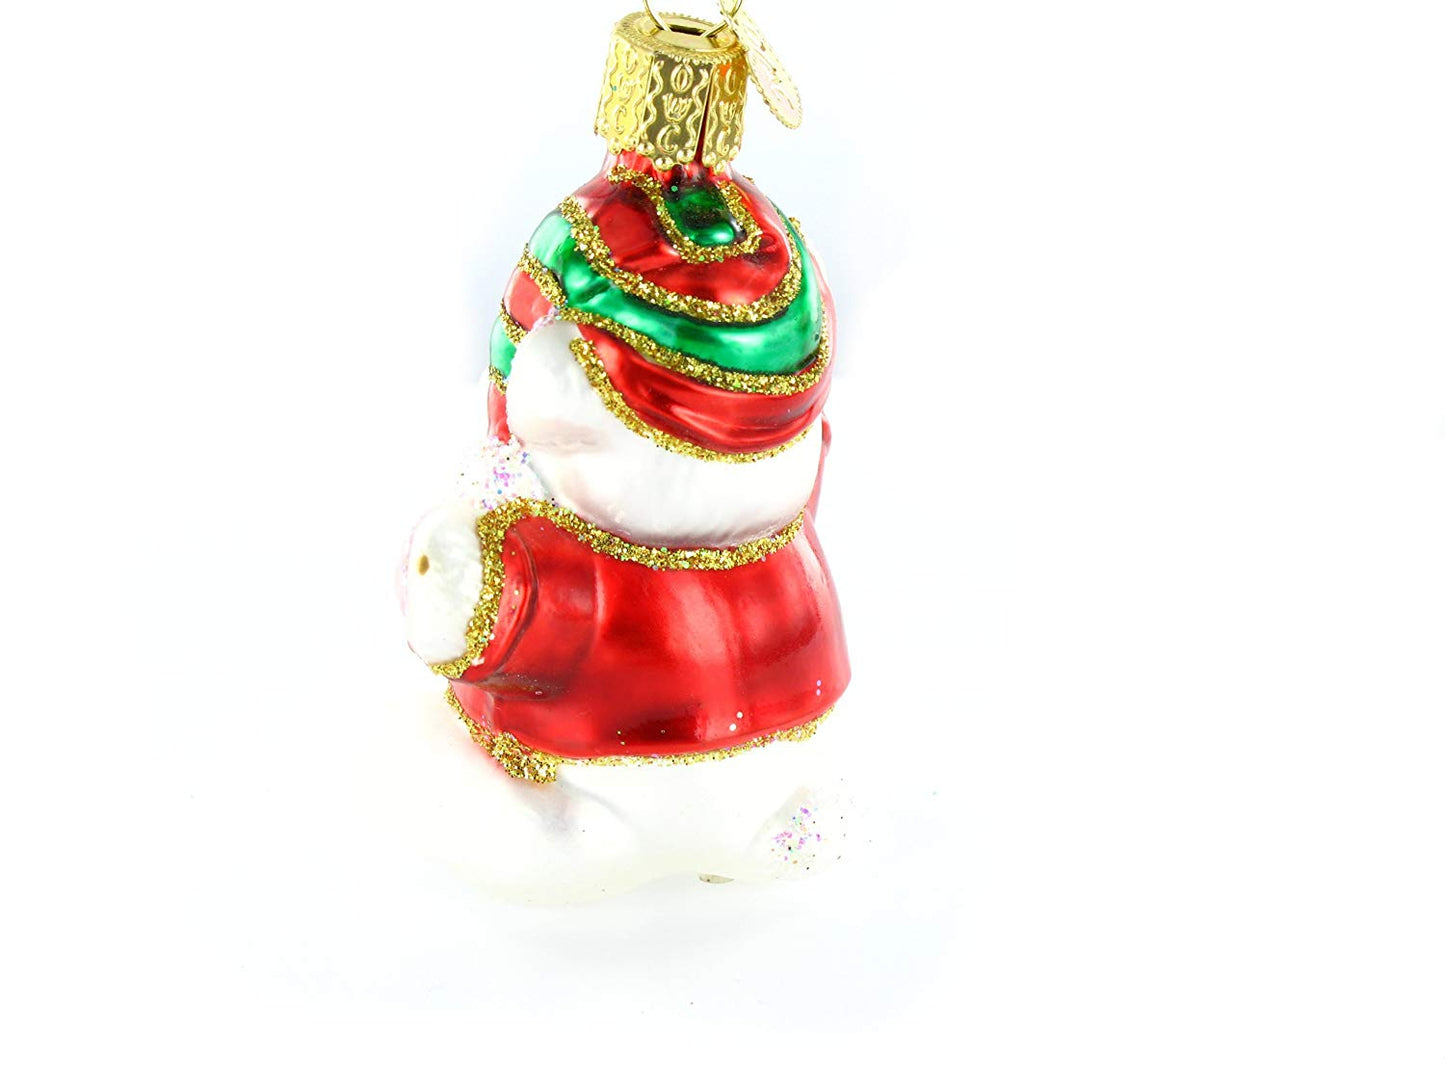 Old World Christmas Ornament Baby's 1st Christmas Ornament